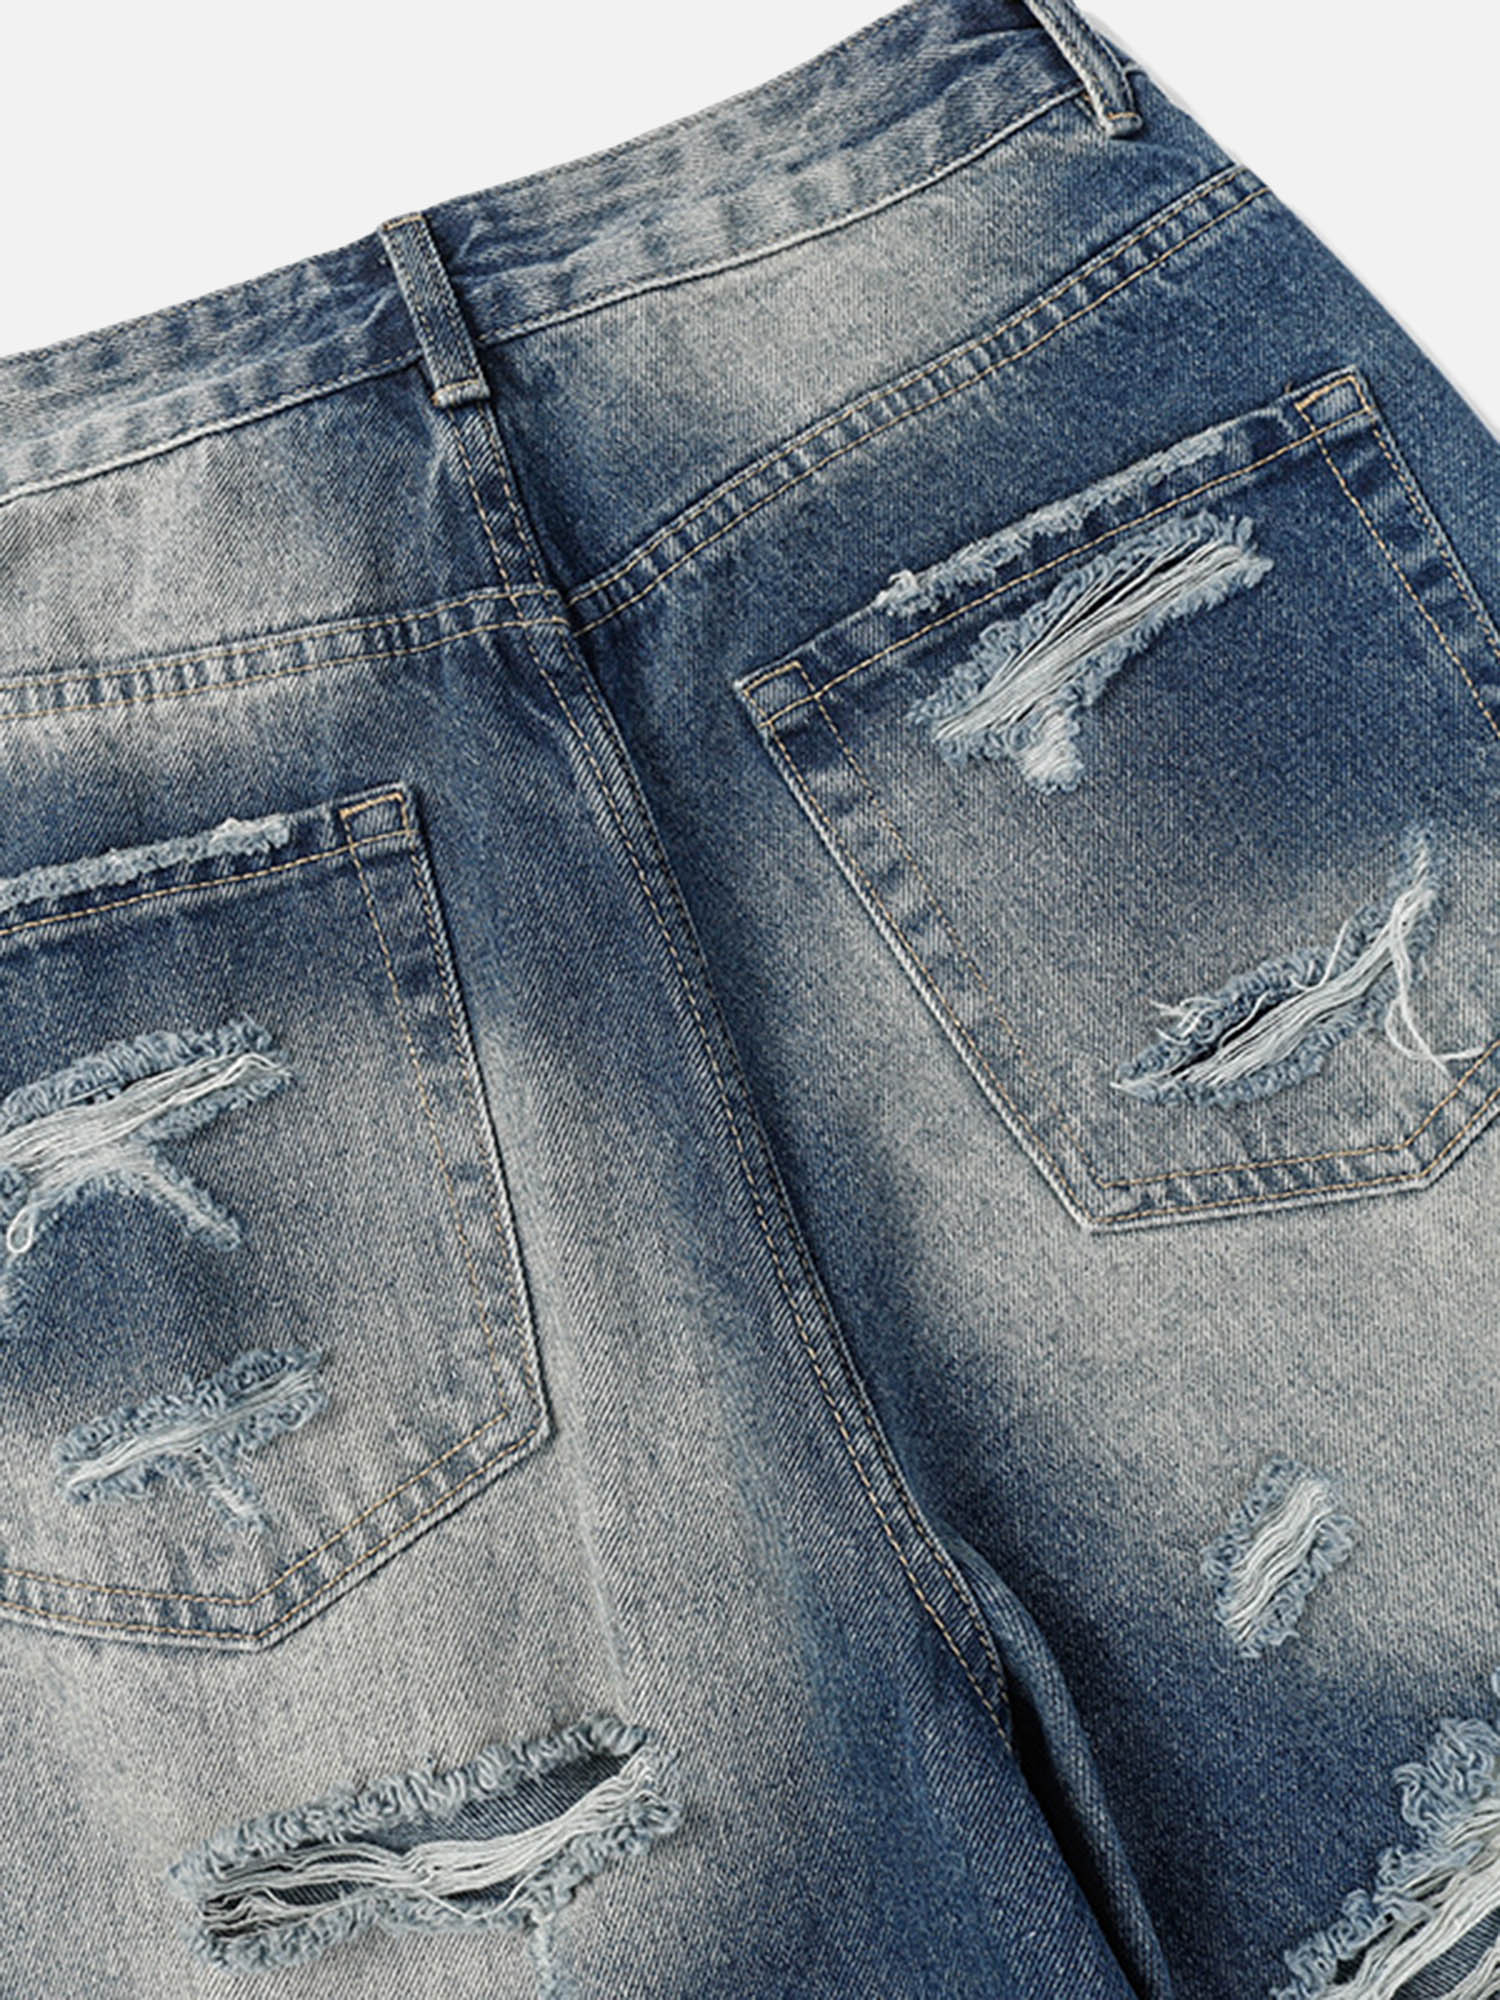 High Street Heavy Duty Ripped Washed Straight Jeans